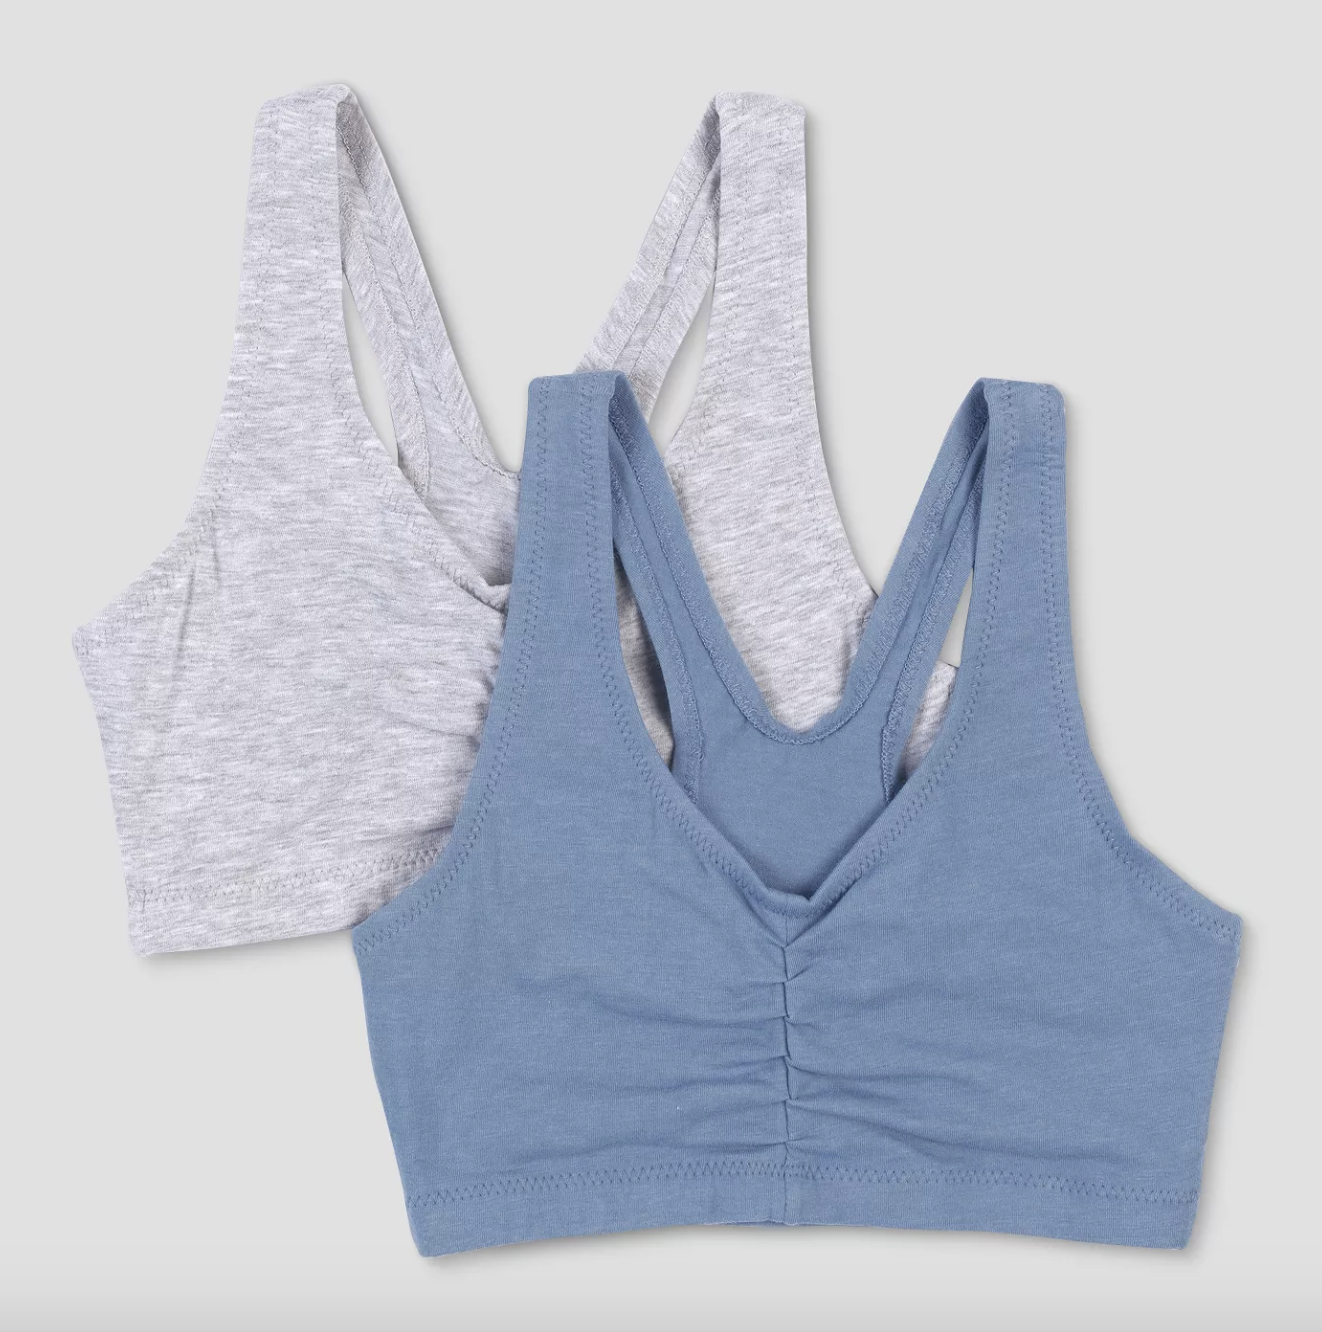 Gray and blue cotton sports bras